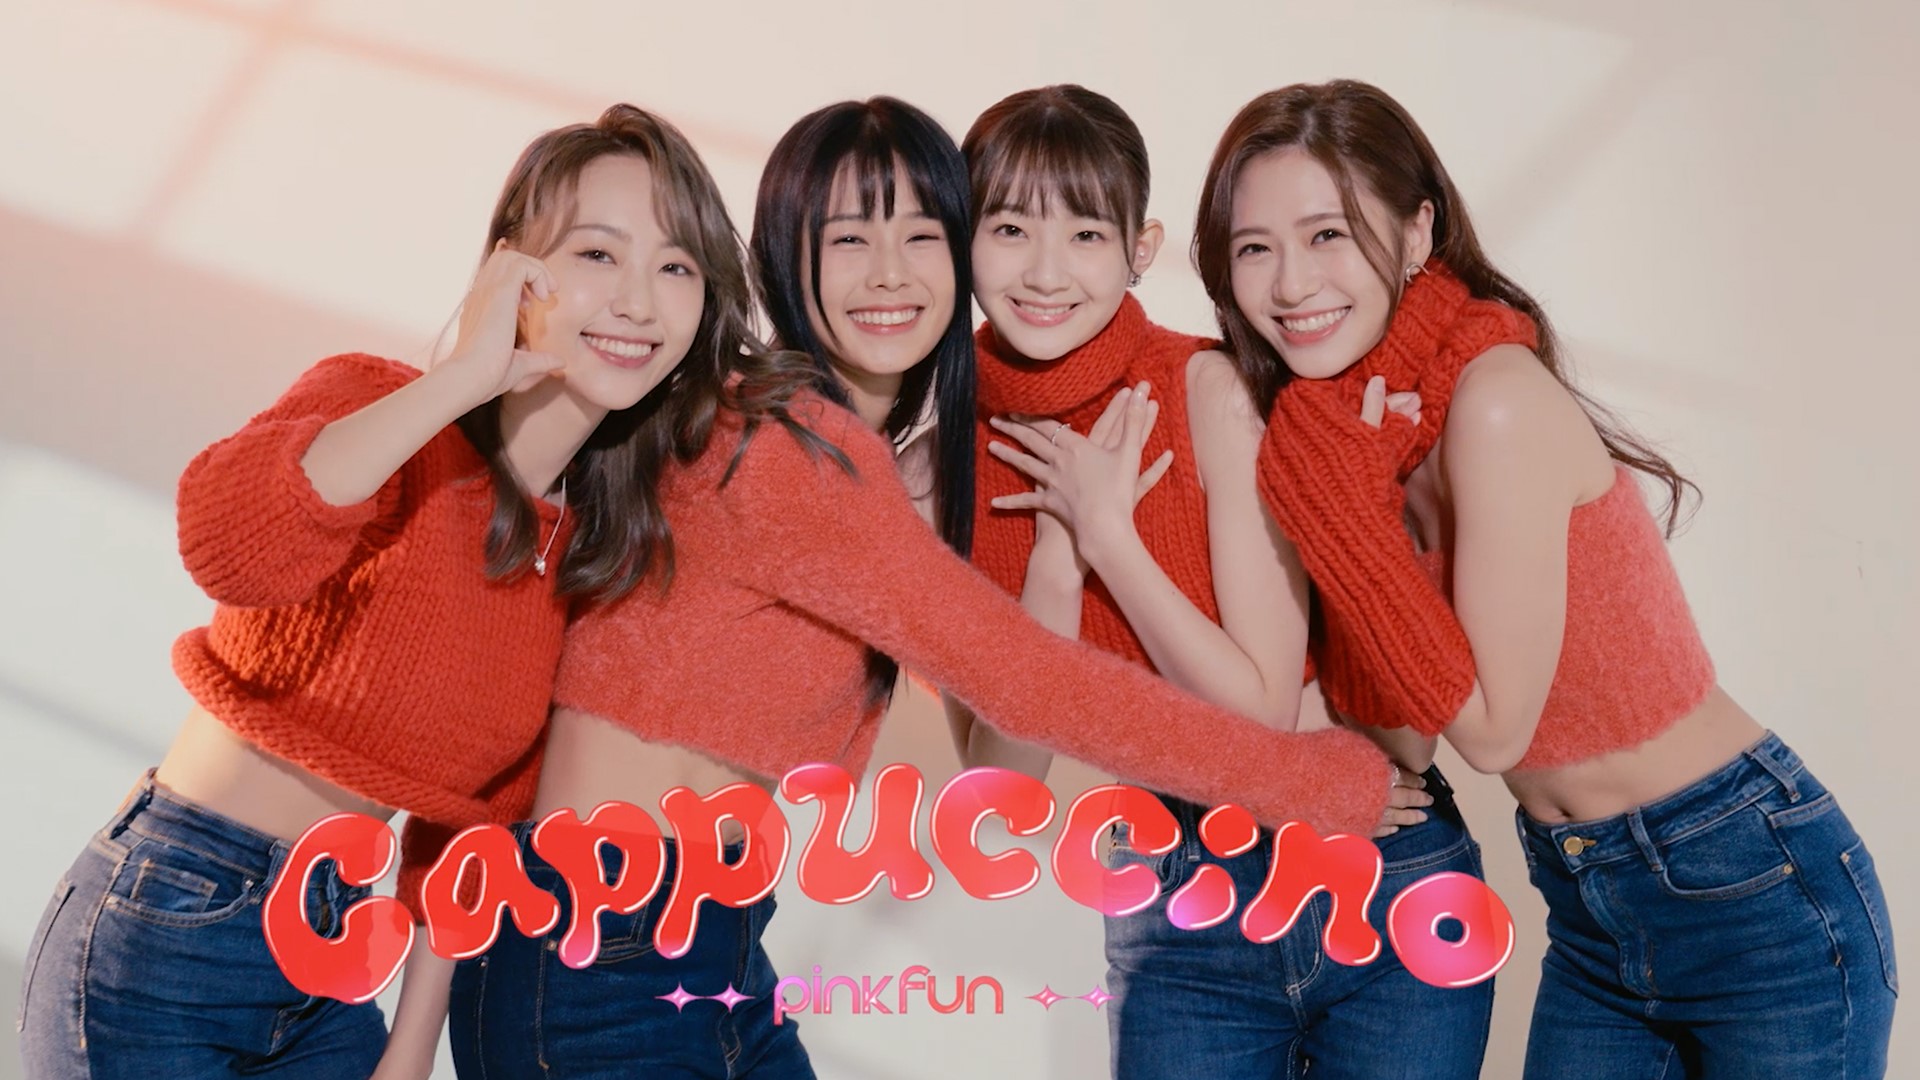 《Cappuccino》Official Music Video